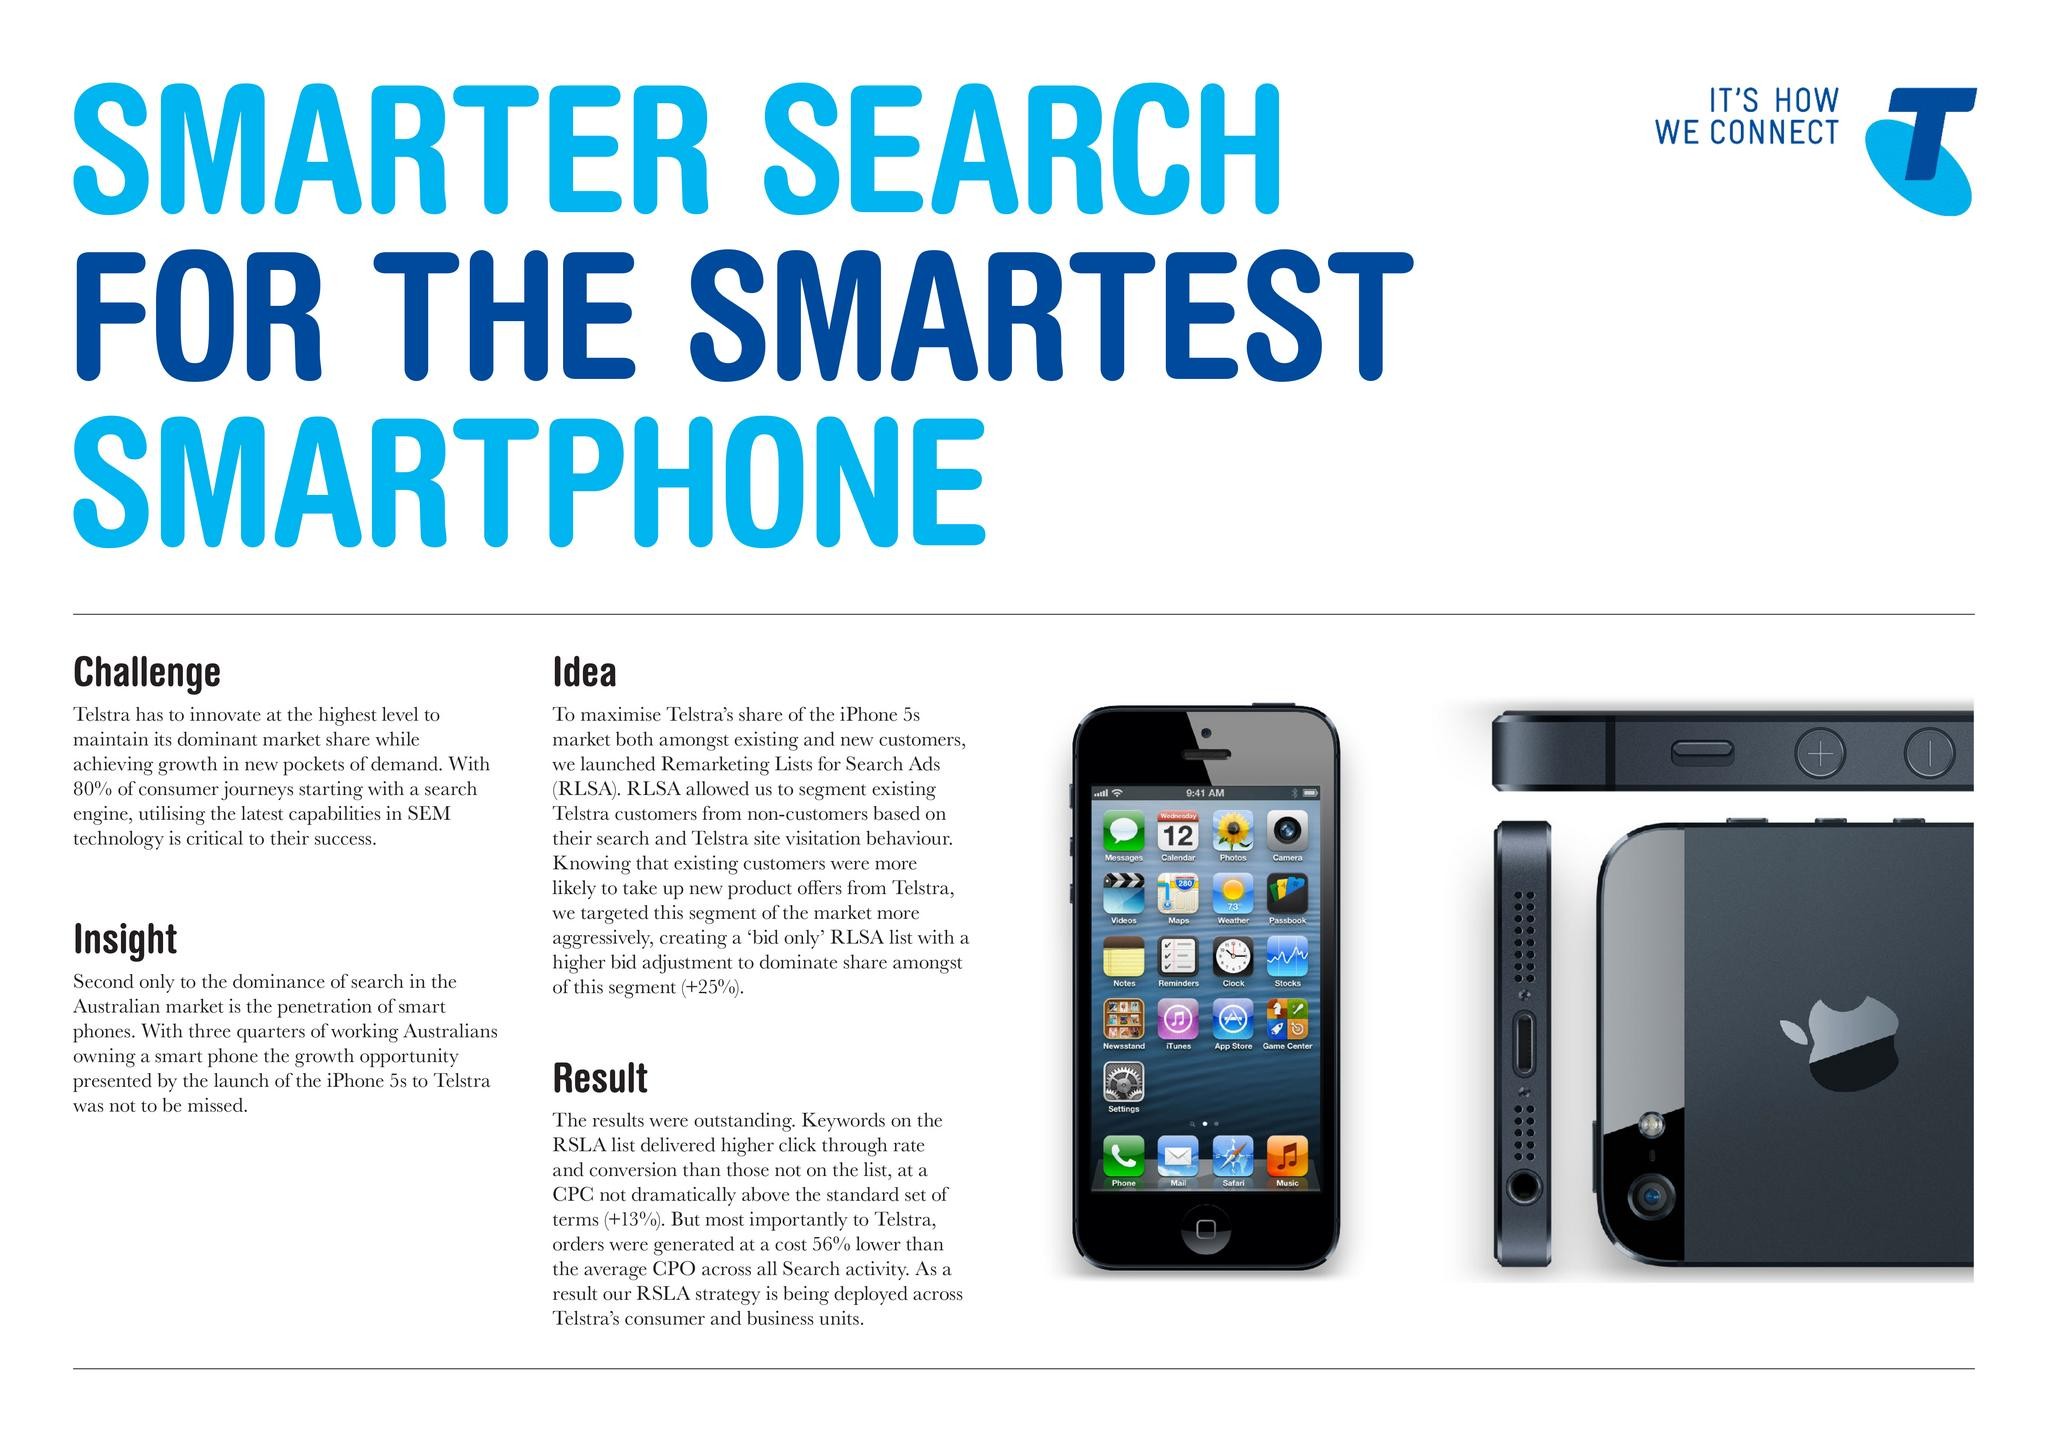 SMARTER SEARCH FOR THE SMARTEST SMARTPHONE